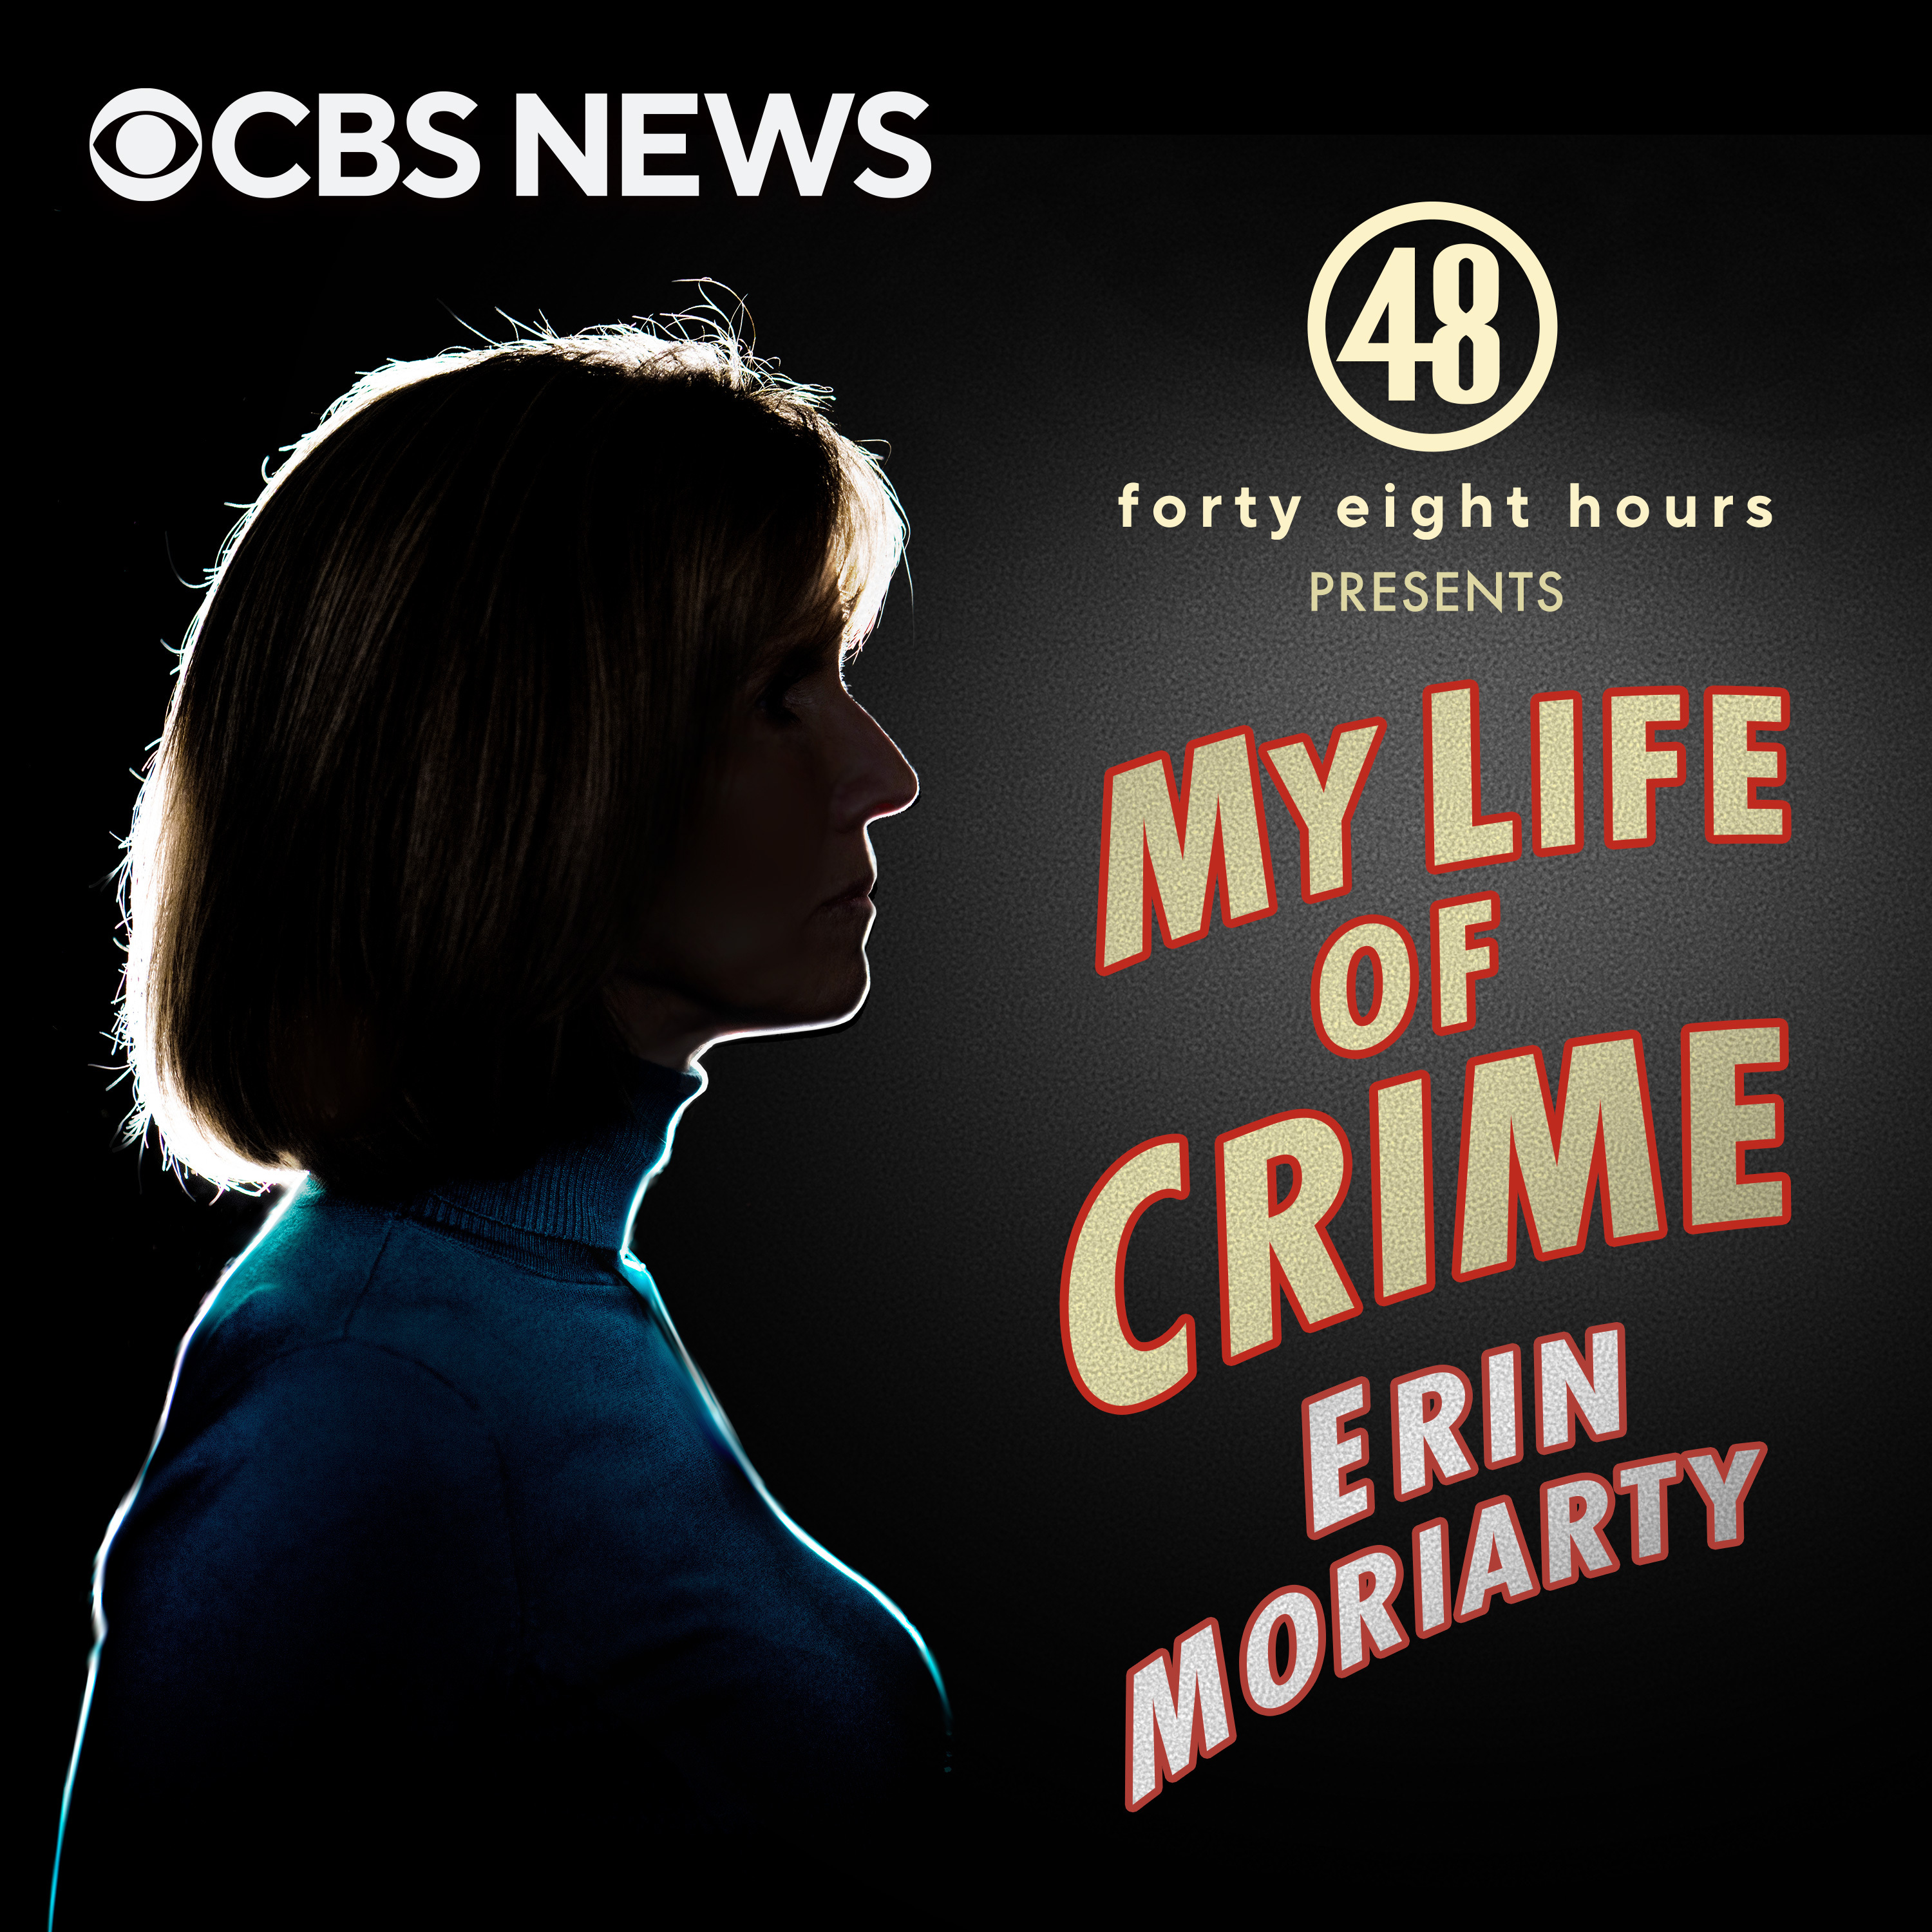 Discerning the Truth: Interrogations and False Confessions | My Life of Crime by CBS News